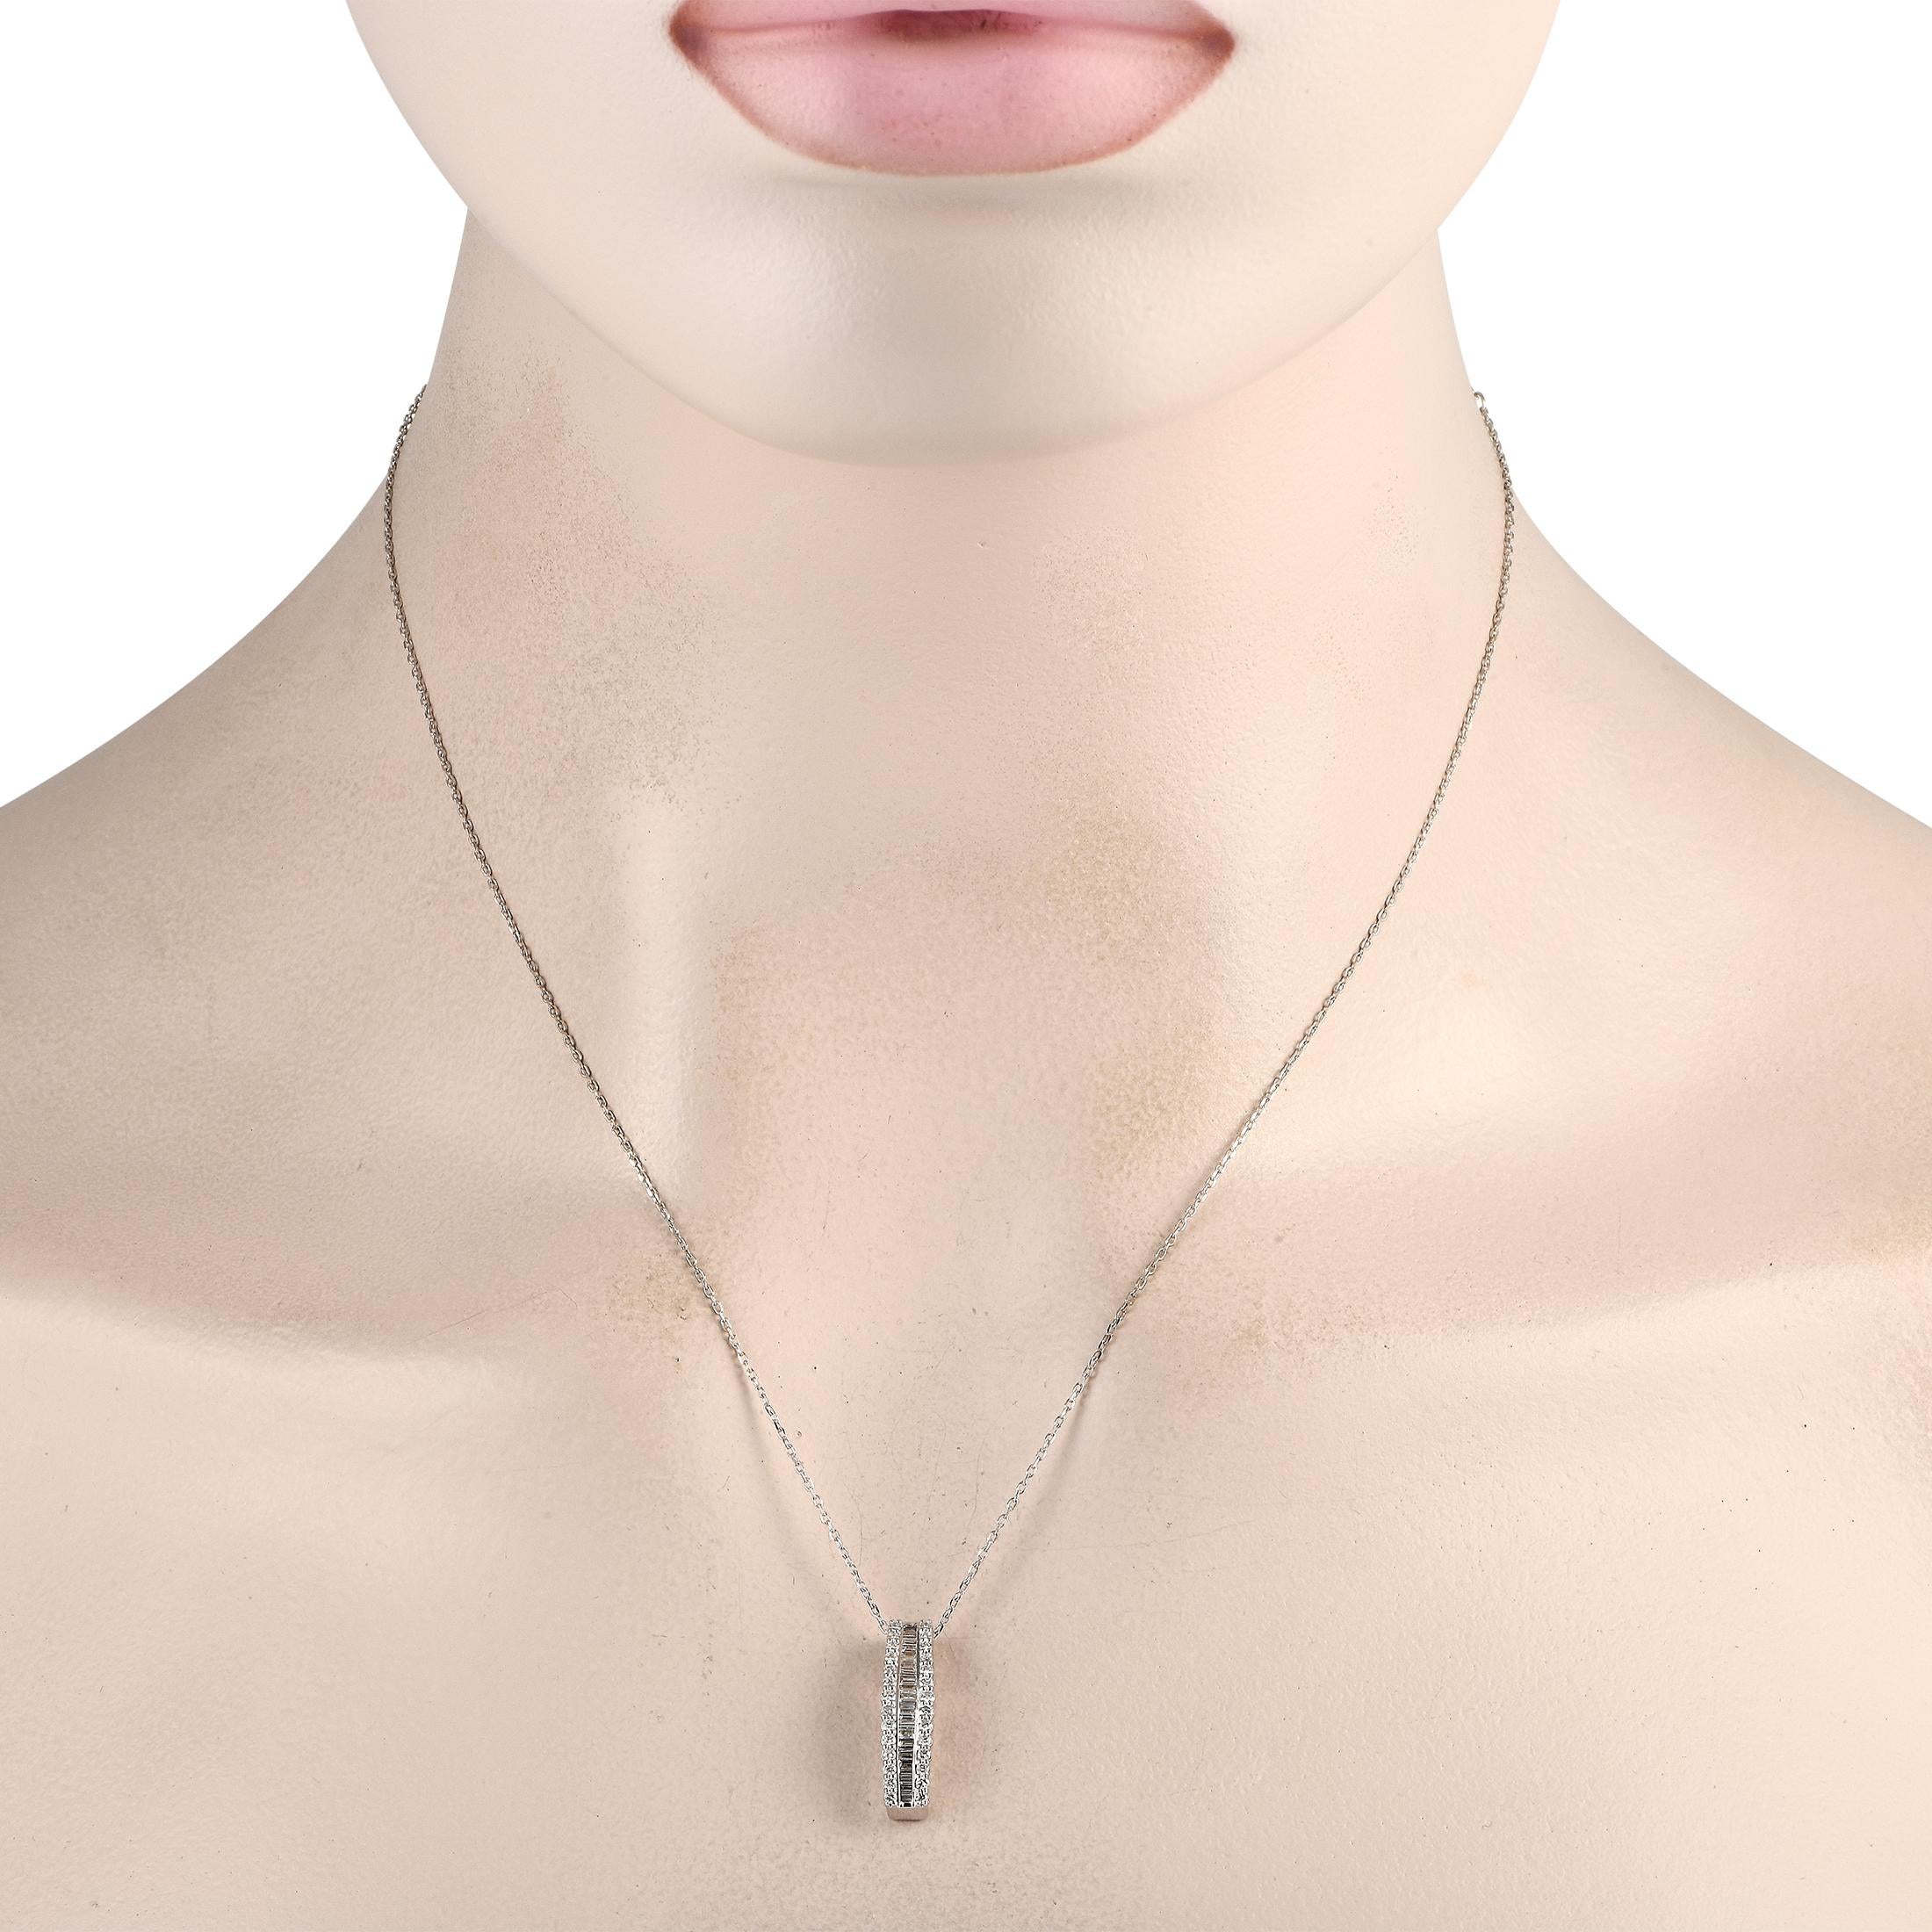 A series of step-cut and round-cut diamonds with a total weight of 0.58 carats elevate this simple, stylish 14K White Gold necklace. The pendant measures 0.75” long, 0.15” wide, and comes attached to a delicate 18” chain. 
 
This jewelry piece is